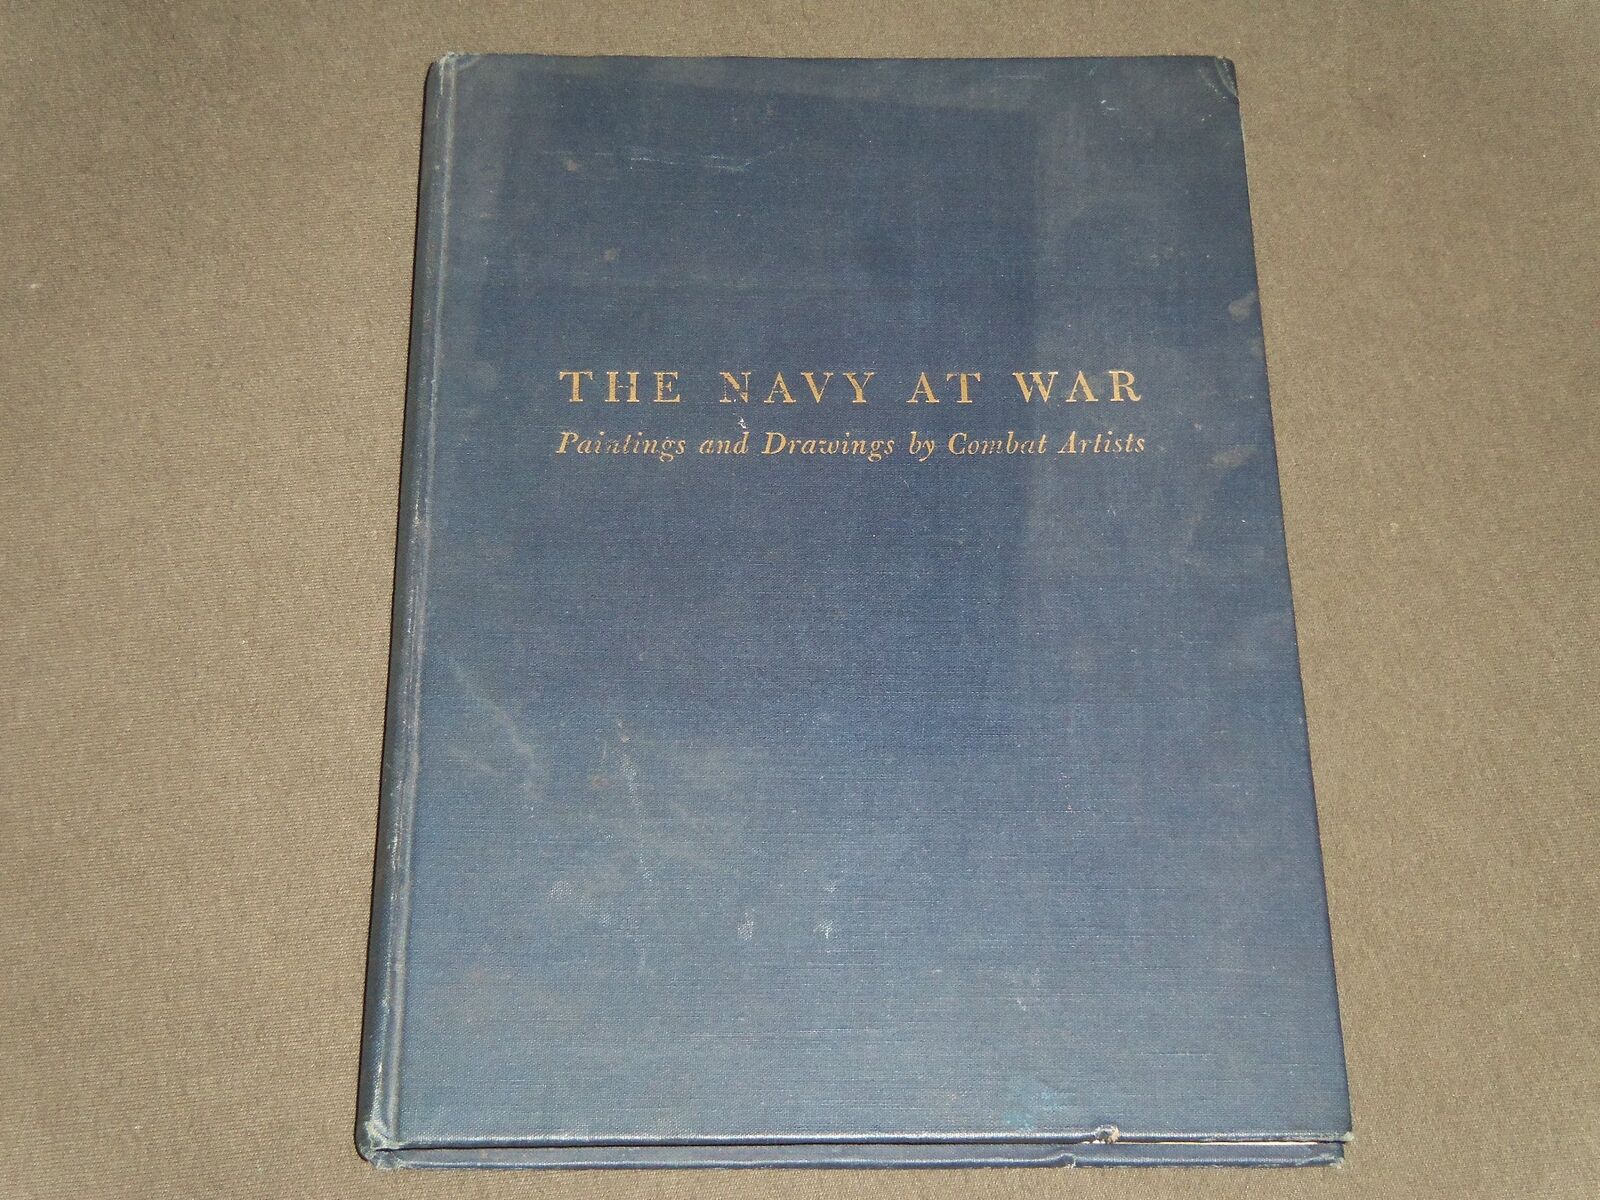 1943 THE NAVY AT WAR HARDCOVER BOOK - PAINTINGS & DRAWINGS BY COMBAT - KD 4330